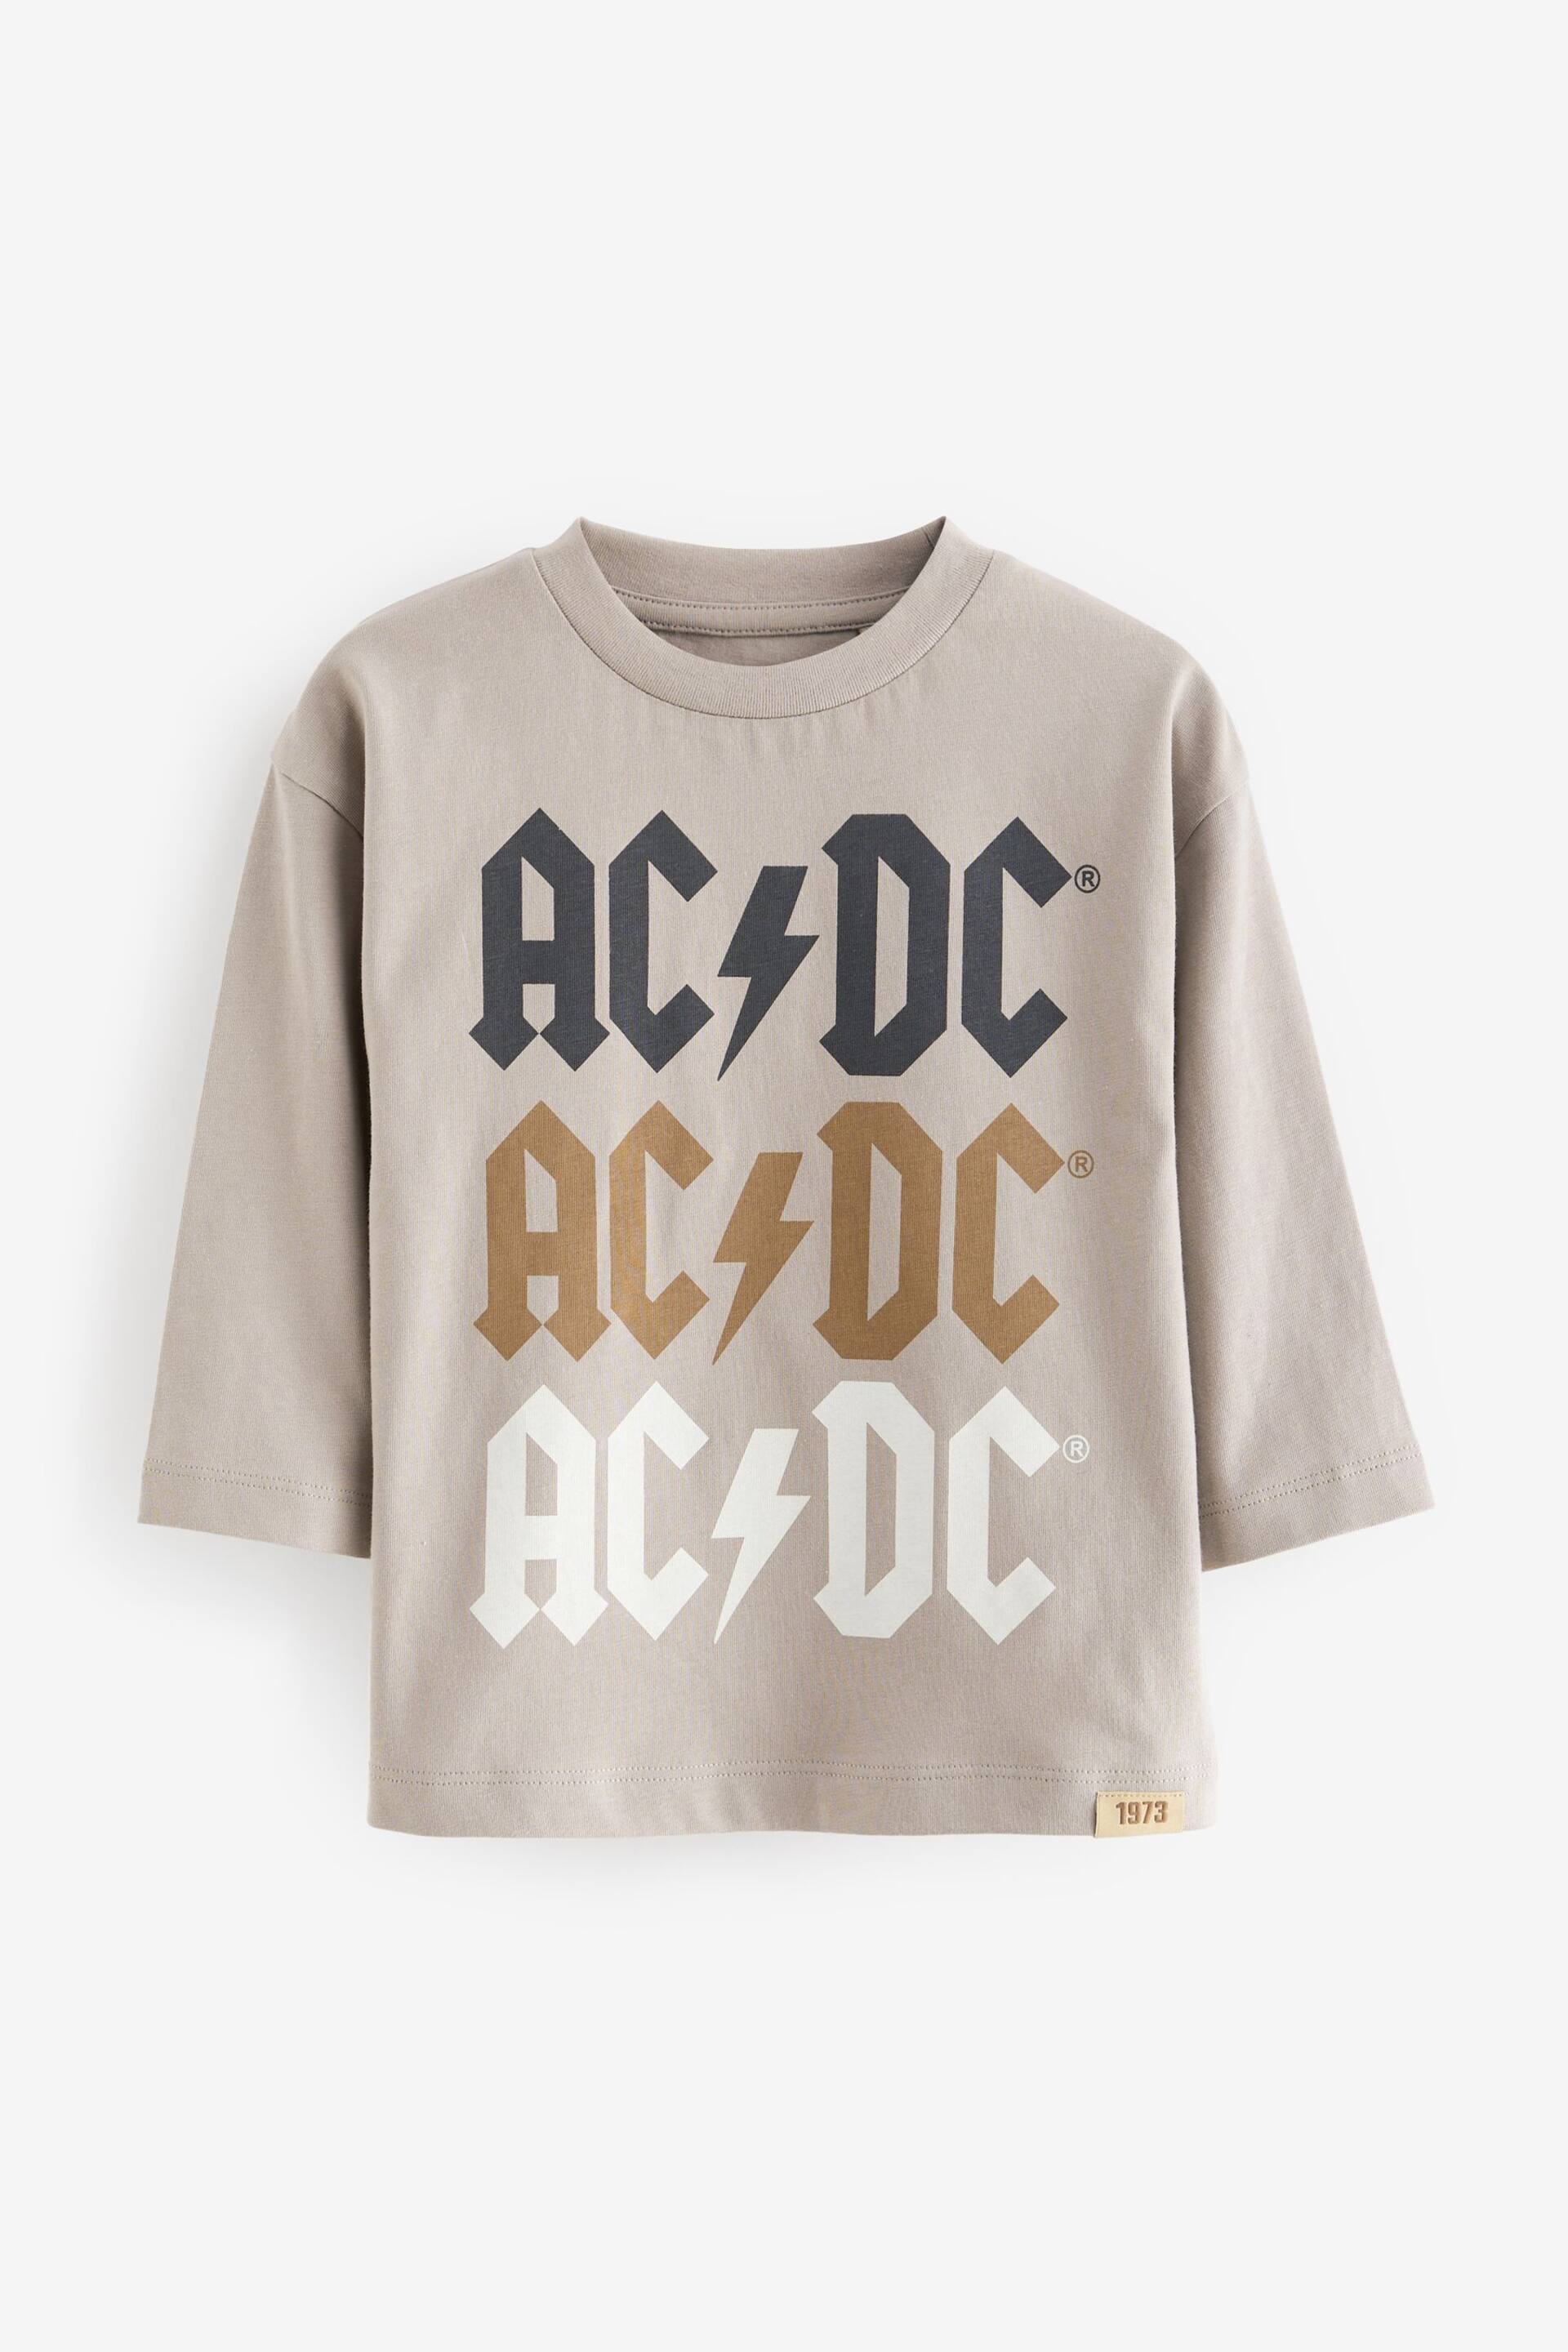 Grey ACDC Long Sleeve T-Shirt (3mths-8yrs) - Image 5 of 8